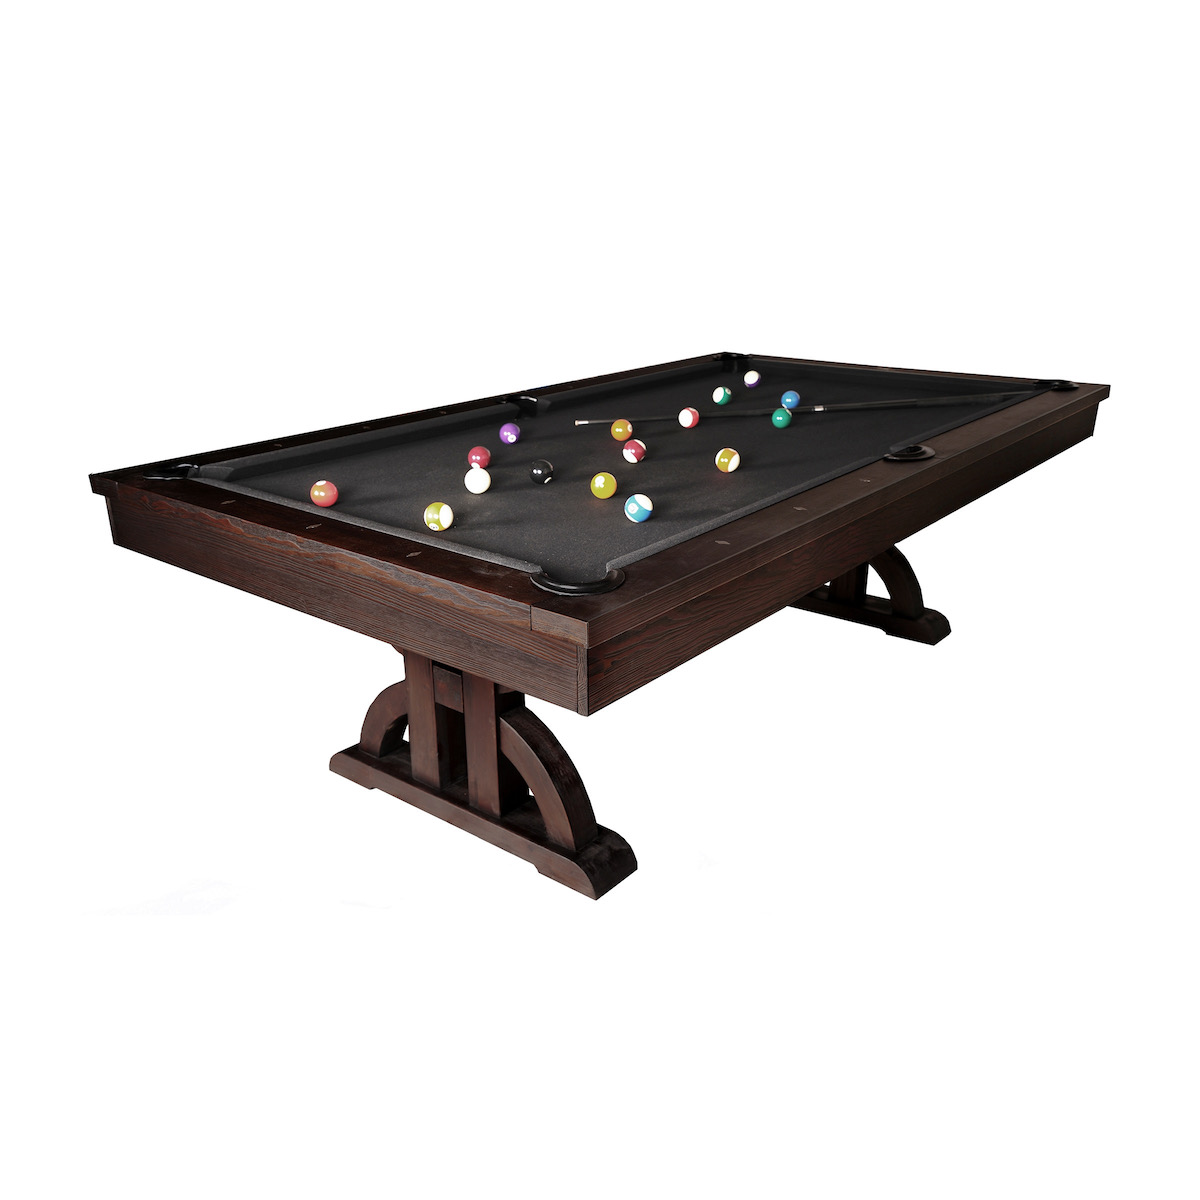 The Drummond Pool Table by Imperial